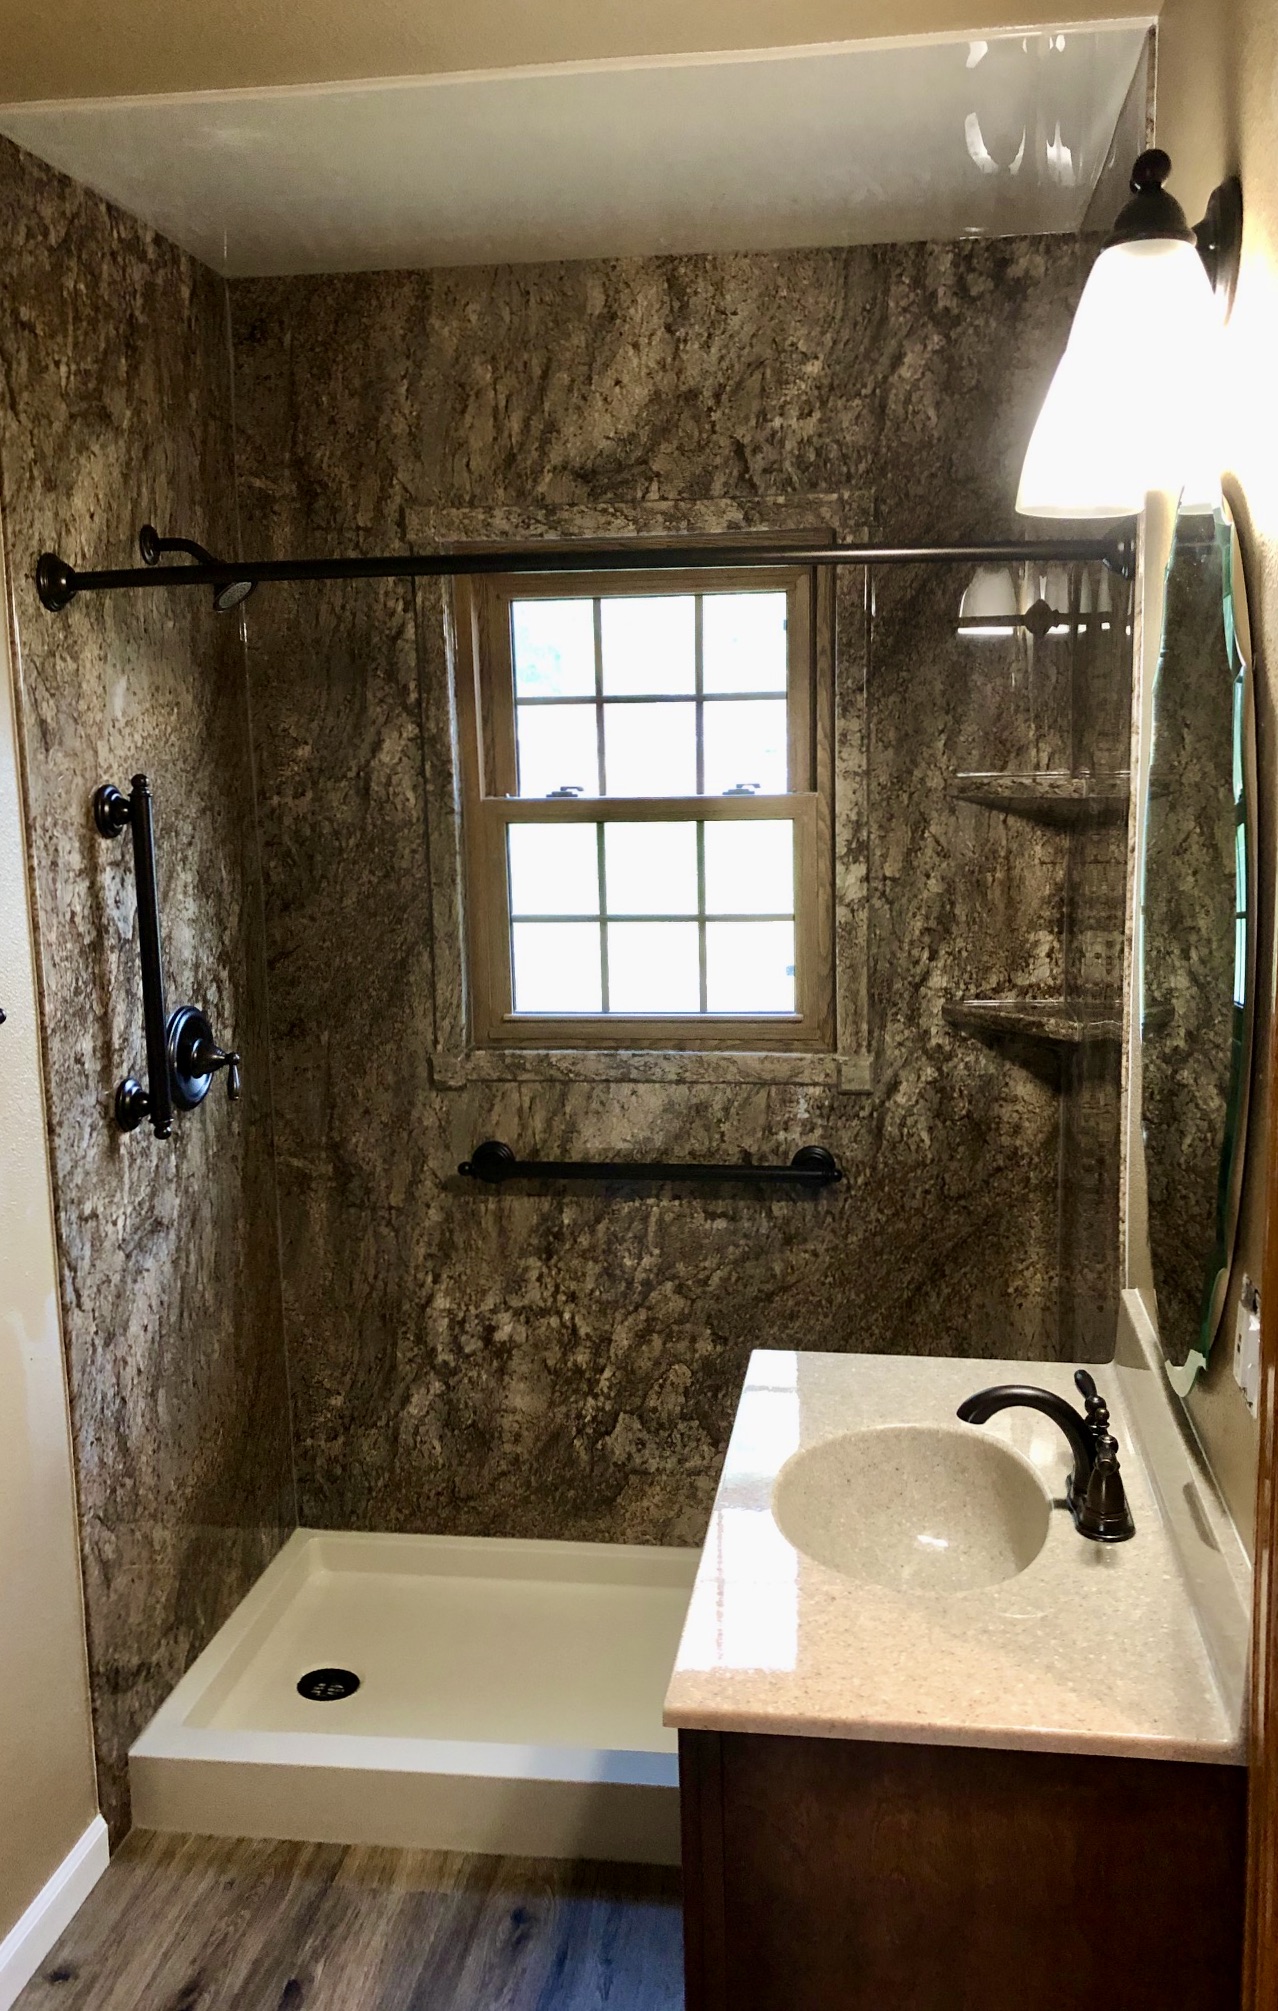 After, Re-Bath Tahoe Granite Walk-in Shower with Oil Rubbed Bronze Fixtures